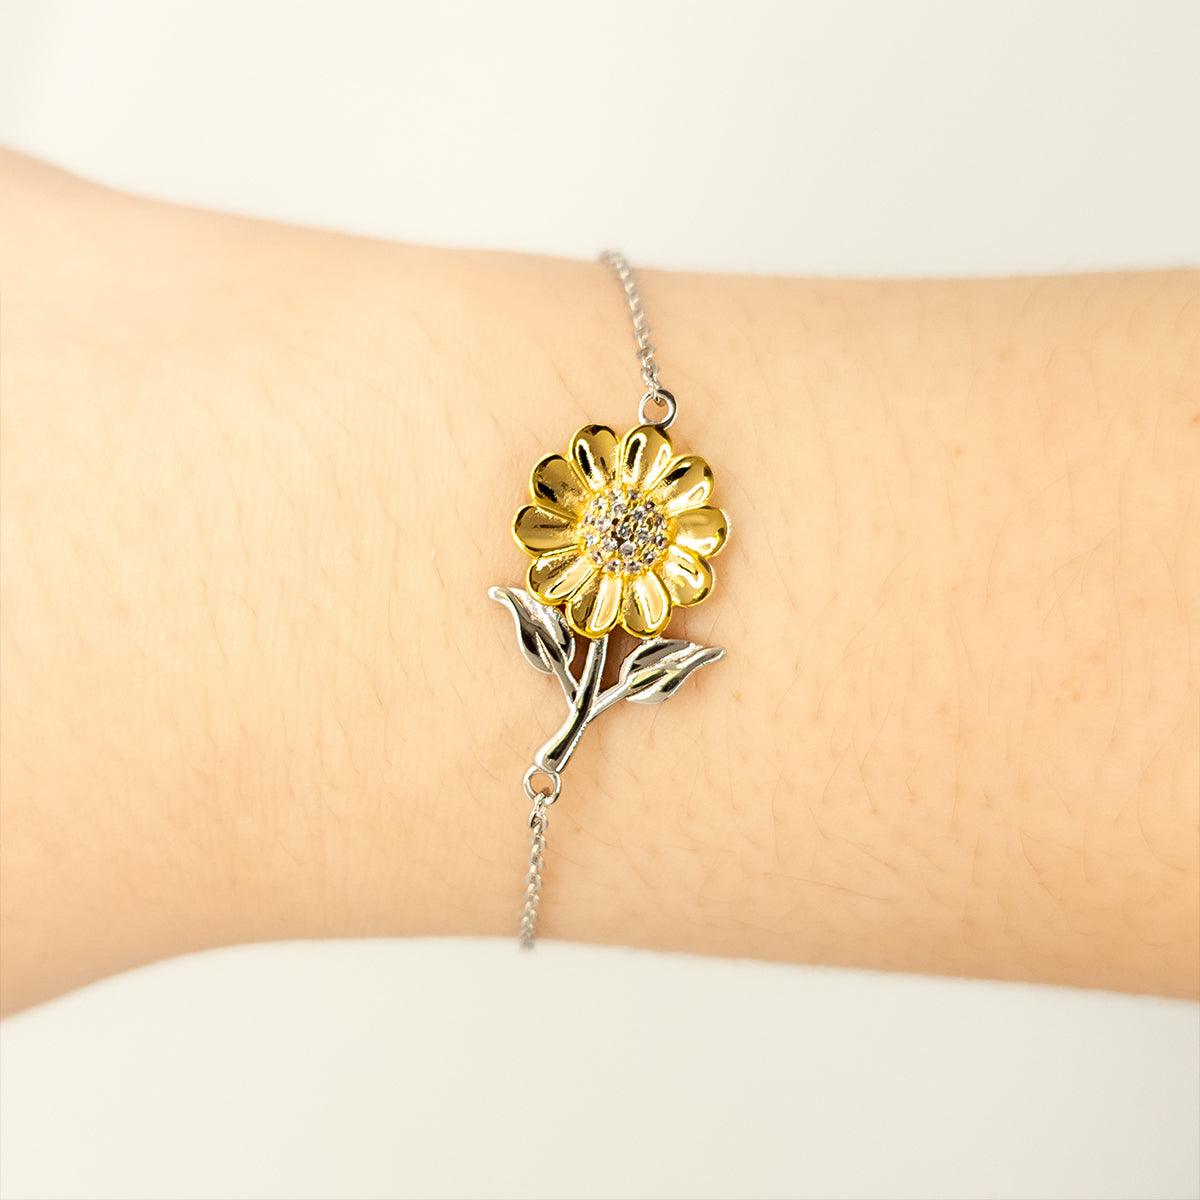 Attendant Sunflower Bracelet - Thanks for being who you are - Birthday Christmas Jewelry Gifts Coworkers Colleague Boss - Mallard Moon Gift Shop